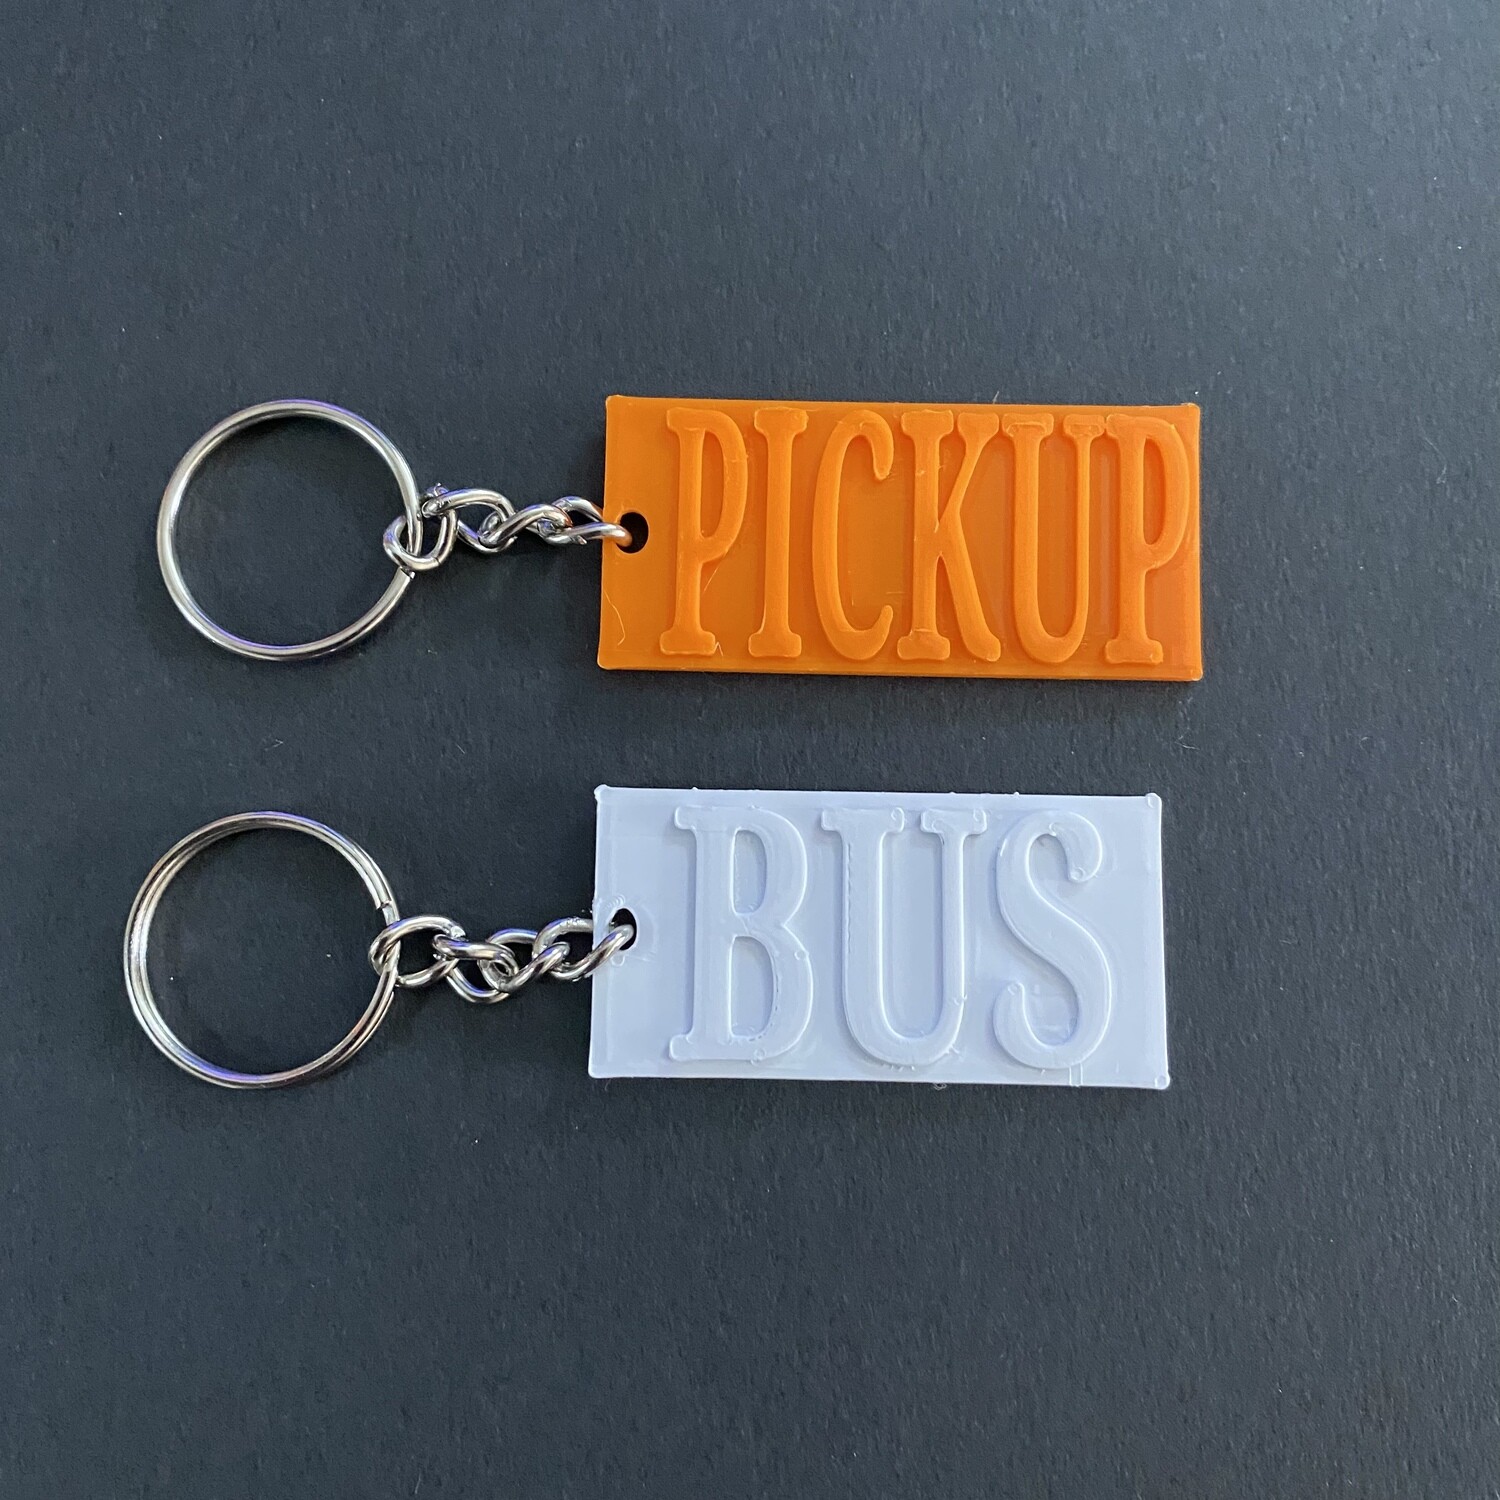 Bus & Pick Up